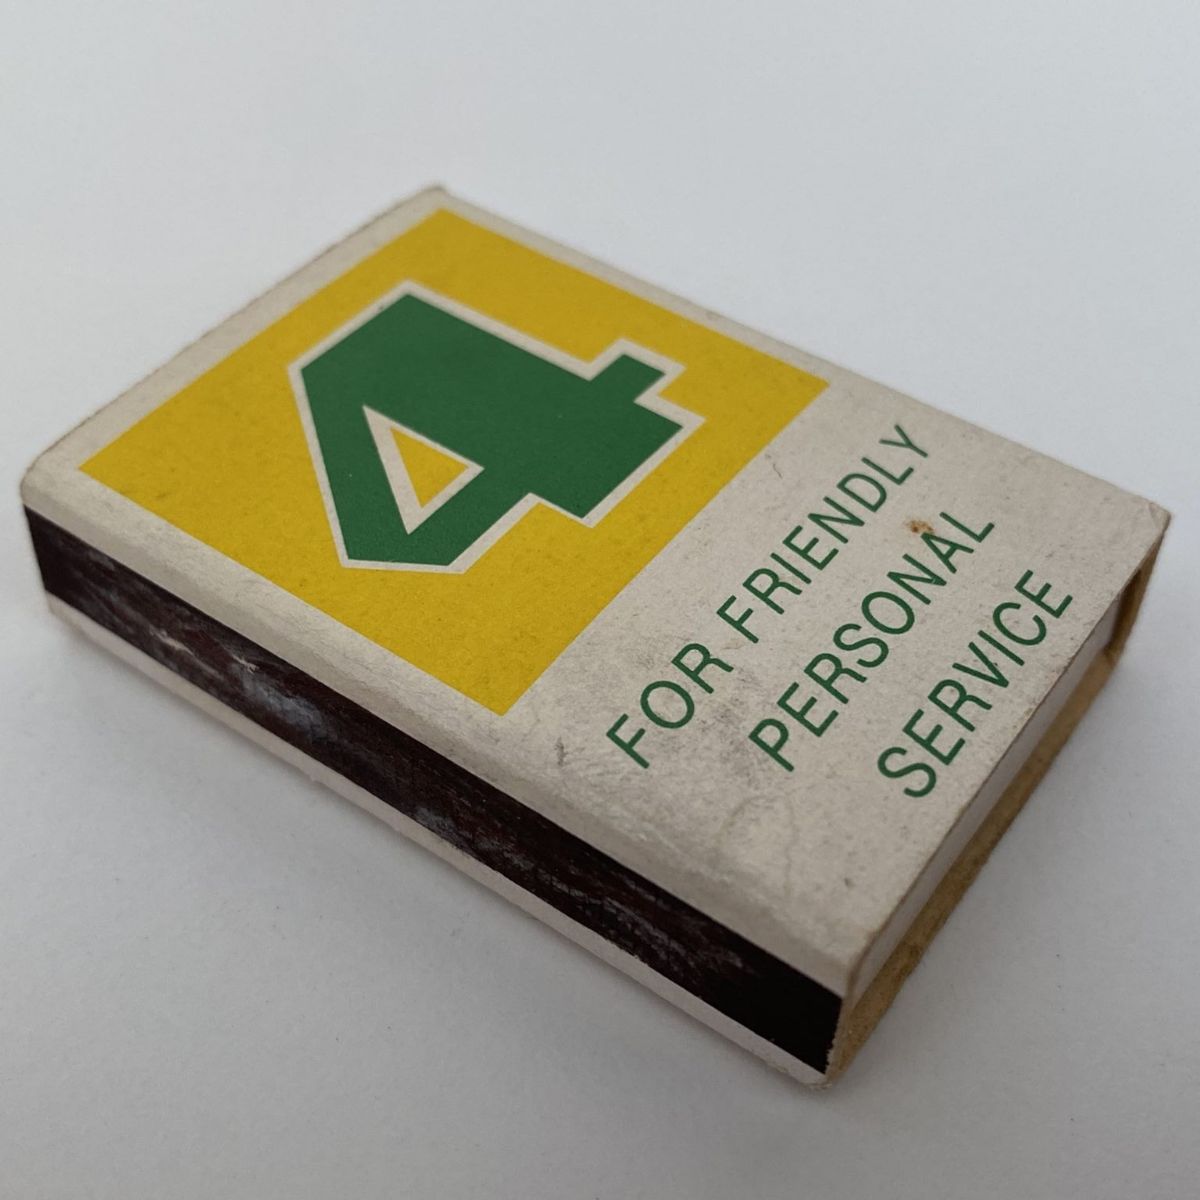 COLLECTABLE MATCHBOX from Four Square Store - Gate Pa